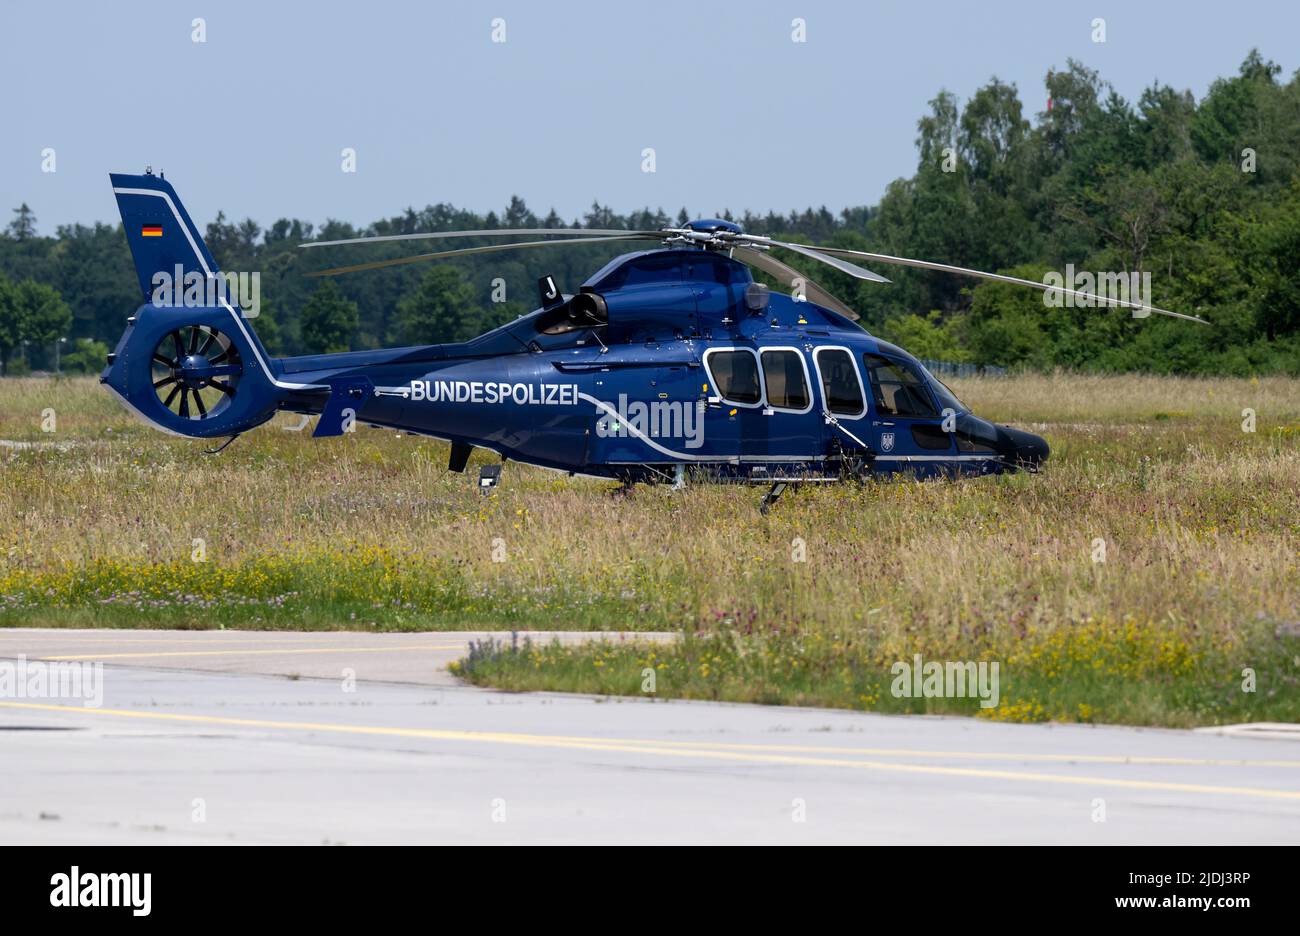 21 June 2022, Bavaria, Oberschleißheim: An 'EC 155' helicopter from Airbus Helicopters stands on the tarmac during a press event about the deployment, tasks and activities of the Federal Police's flying squadron in the context of the G7 summit. The G7 Summit is scheduled to take place at Schloss Elmau from June 26 to 28, 2022. Photo: Sven Hoppe/dpa Stock Photo